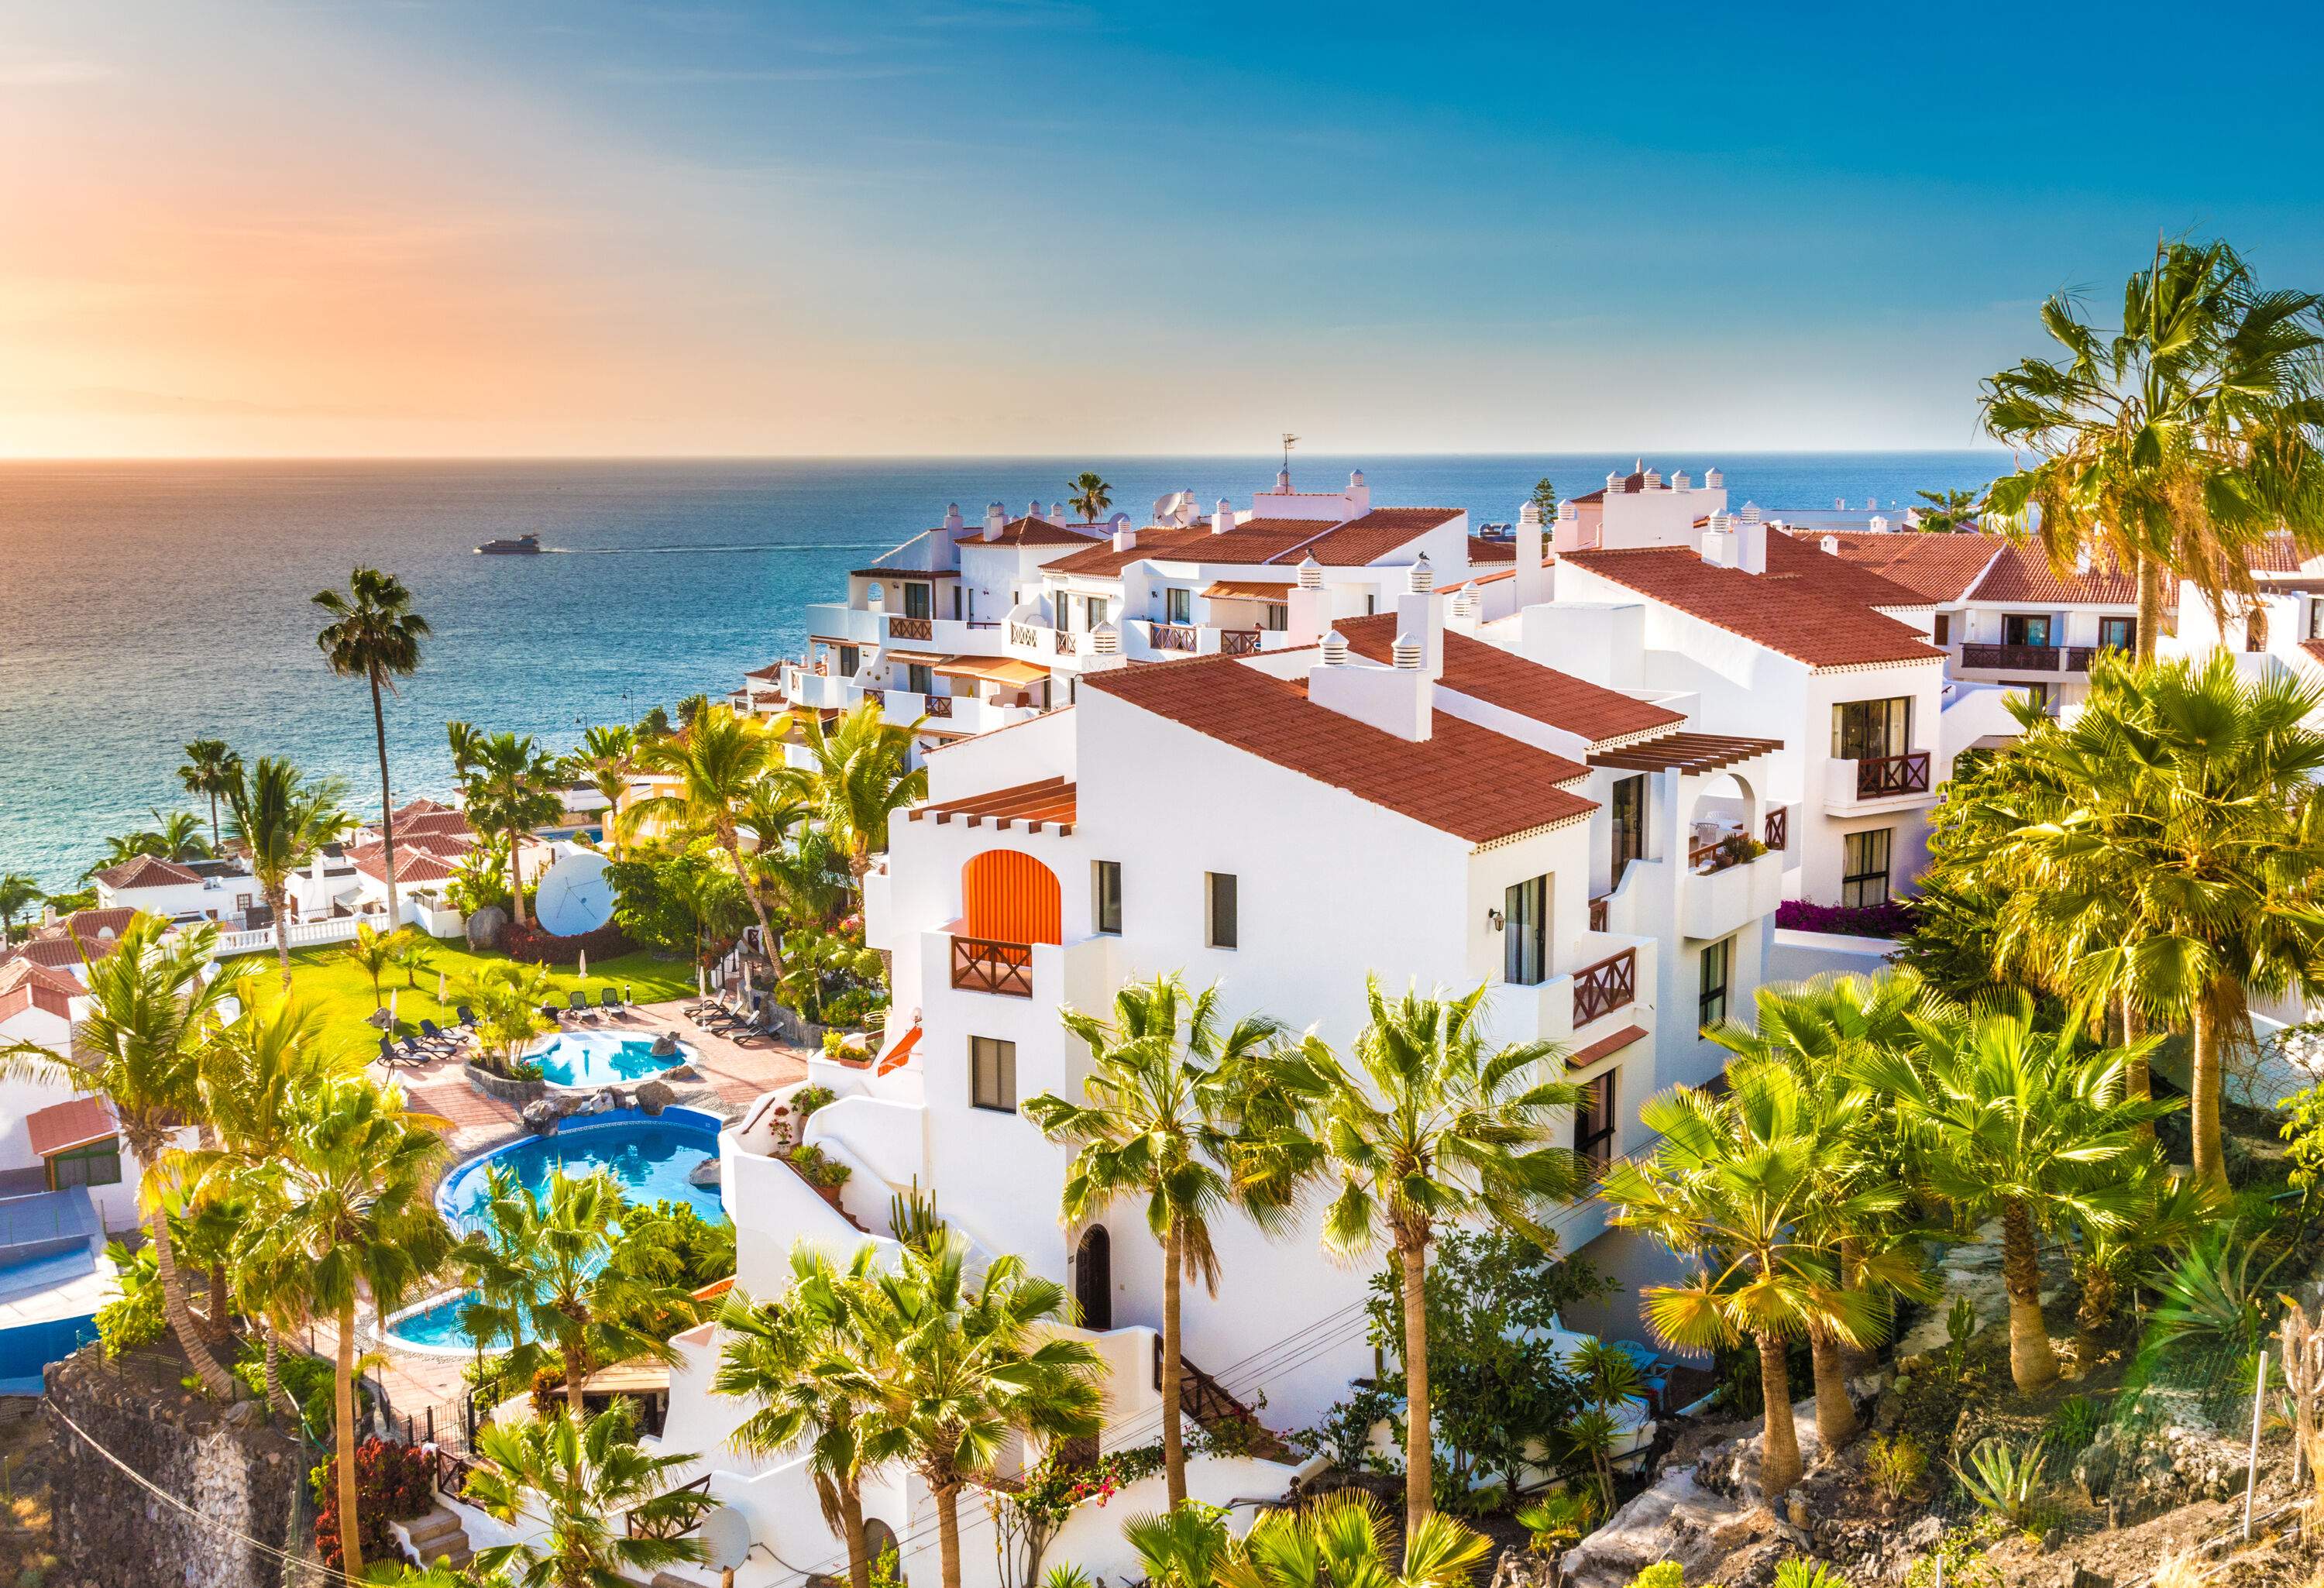 A resort town with palm trees and whitewashed houses overlooking the endless sea.